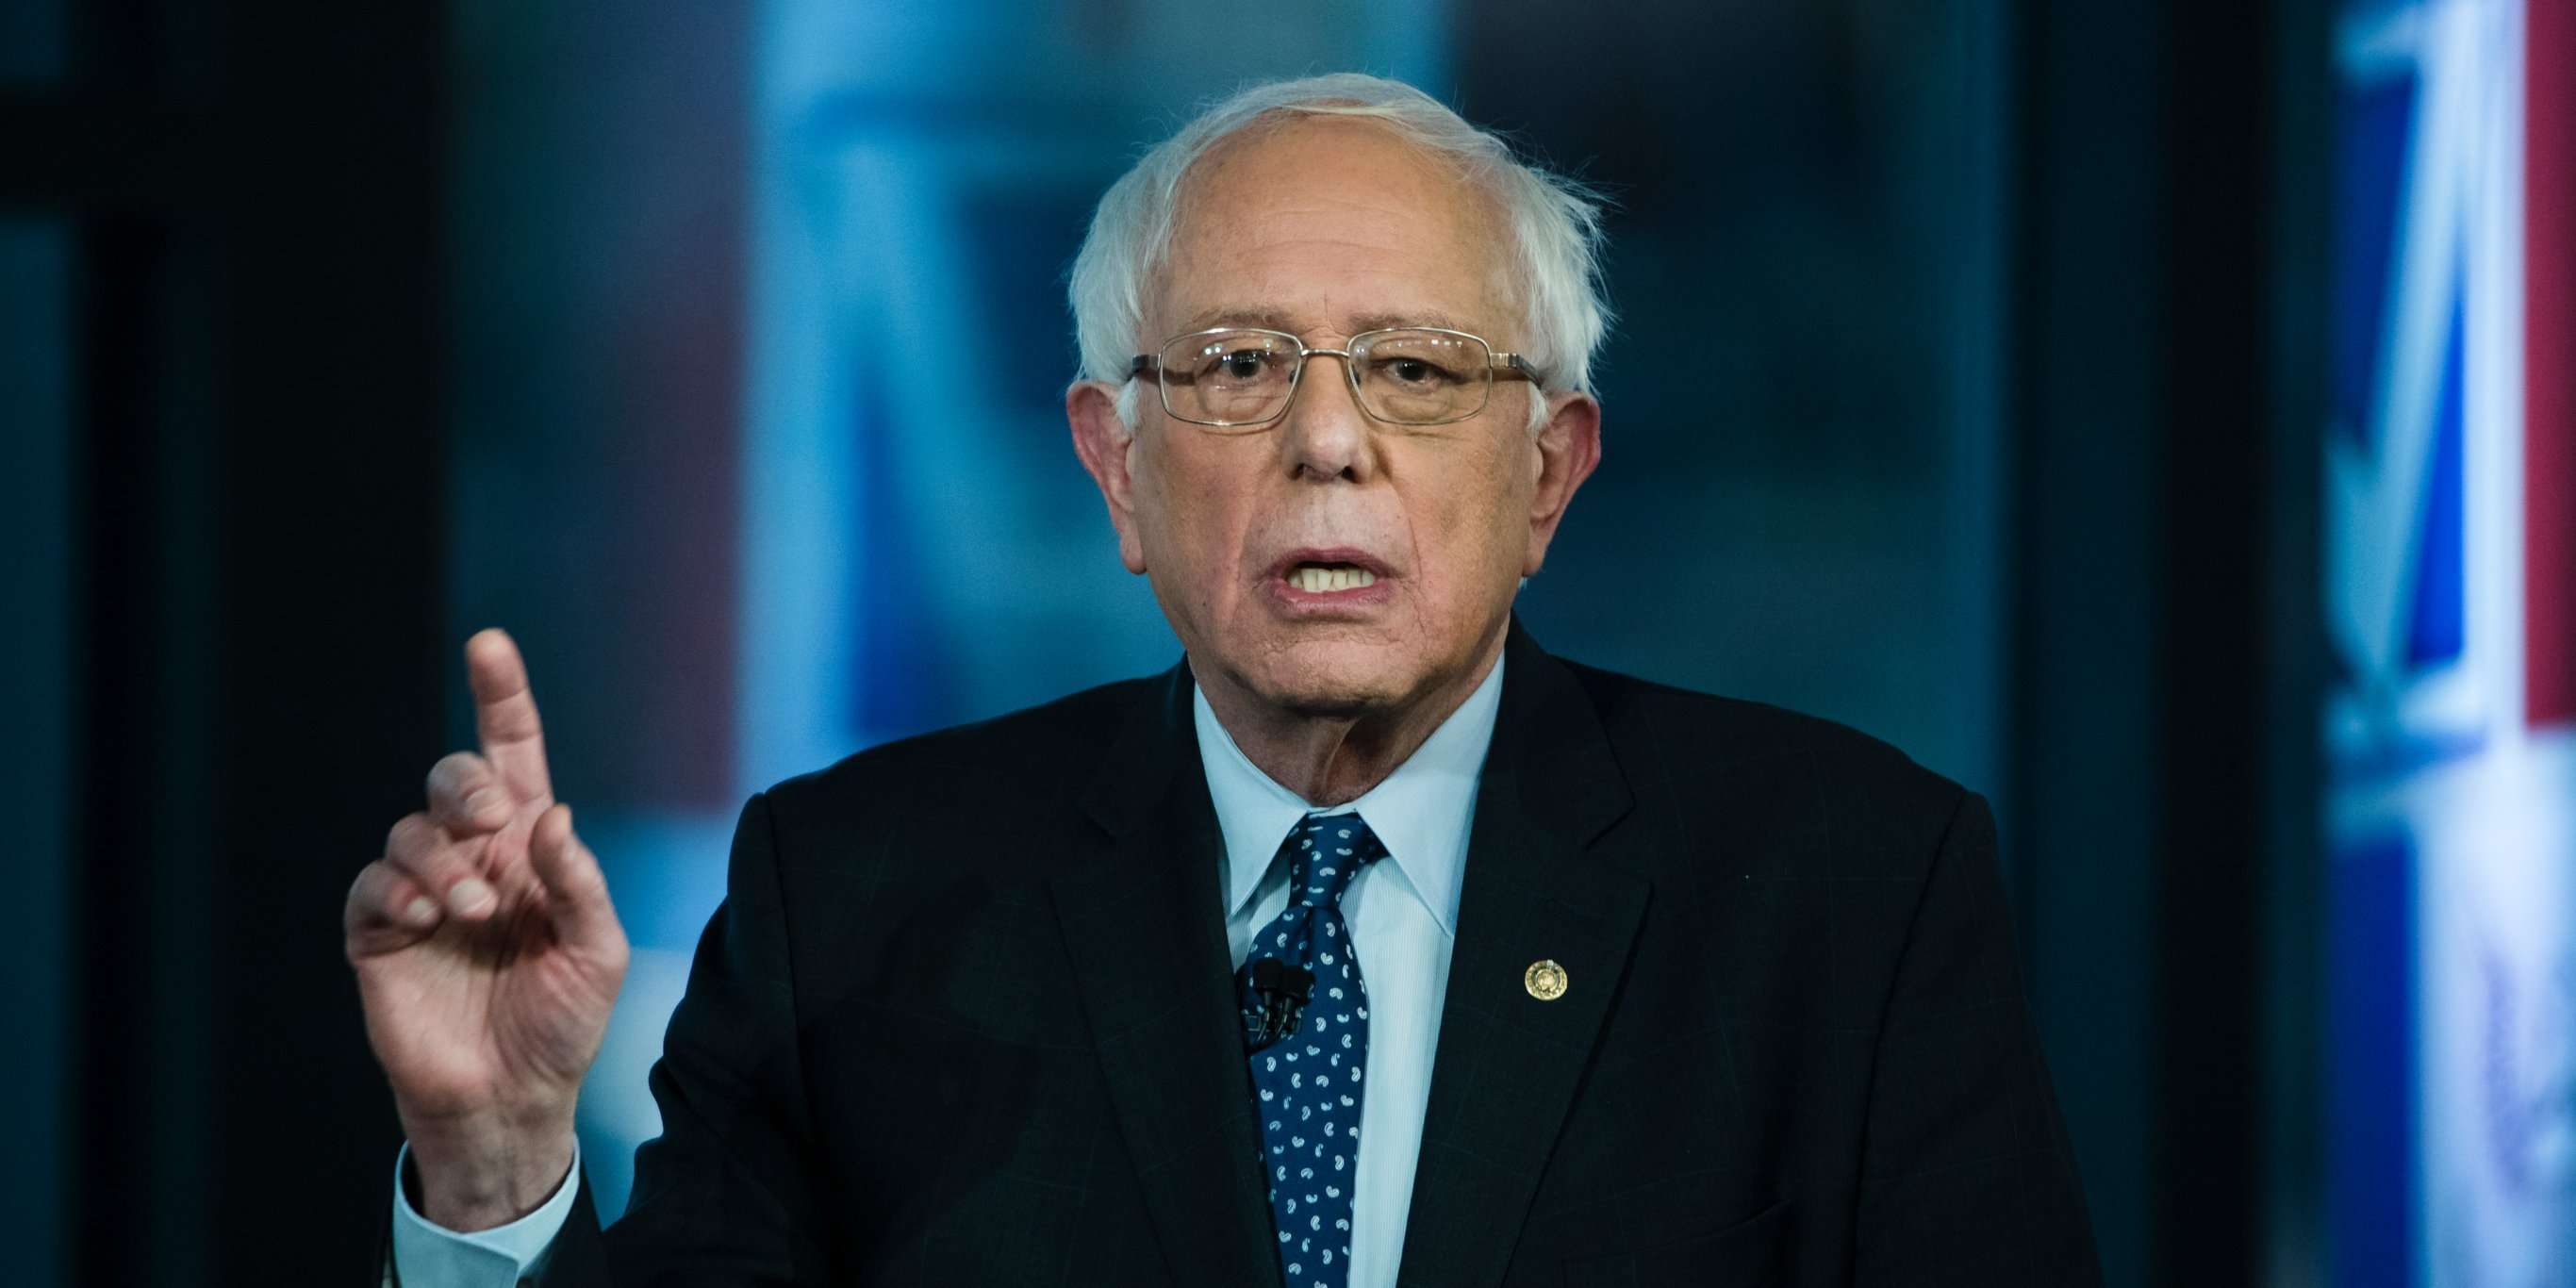 image for Bernie Sanders says Amazon and Netflix are a 'disgrace' for not paying their fair share of tax